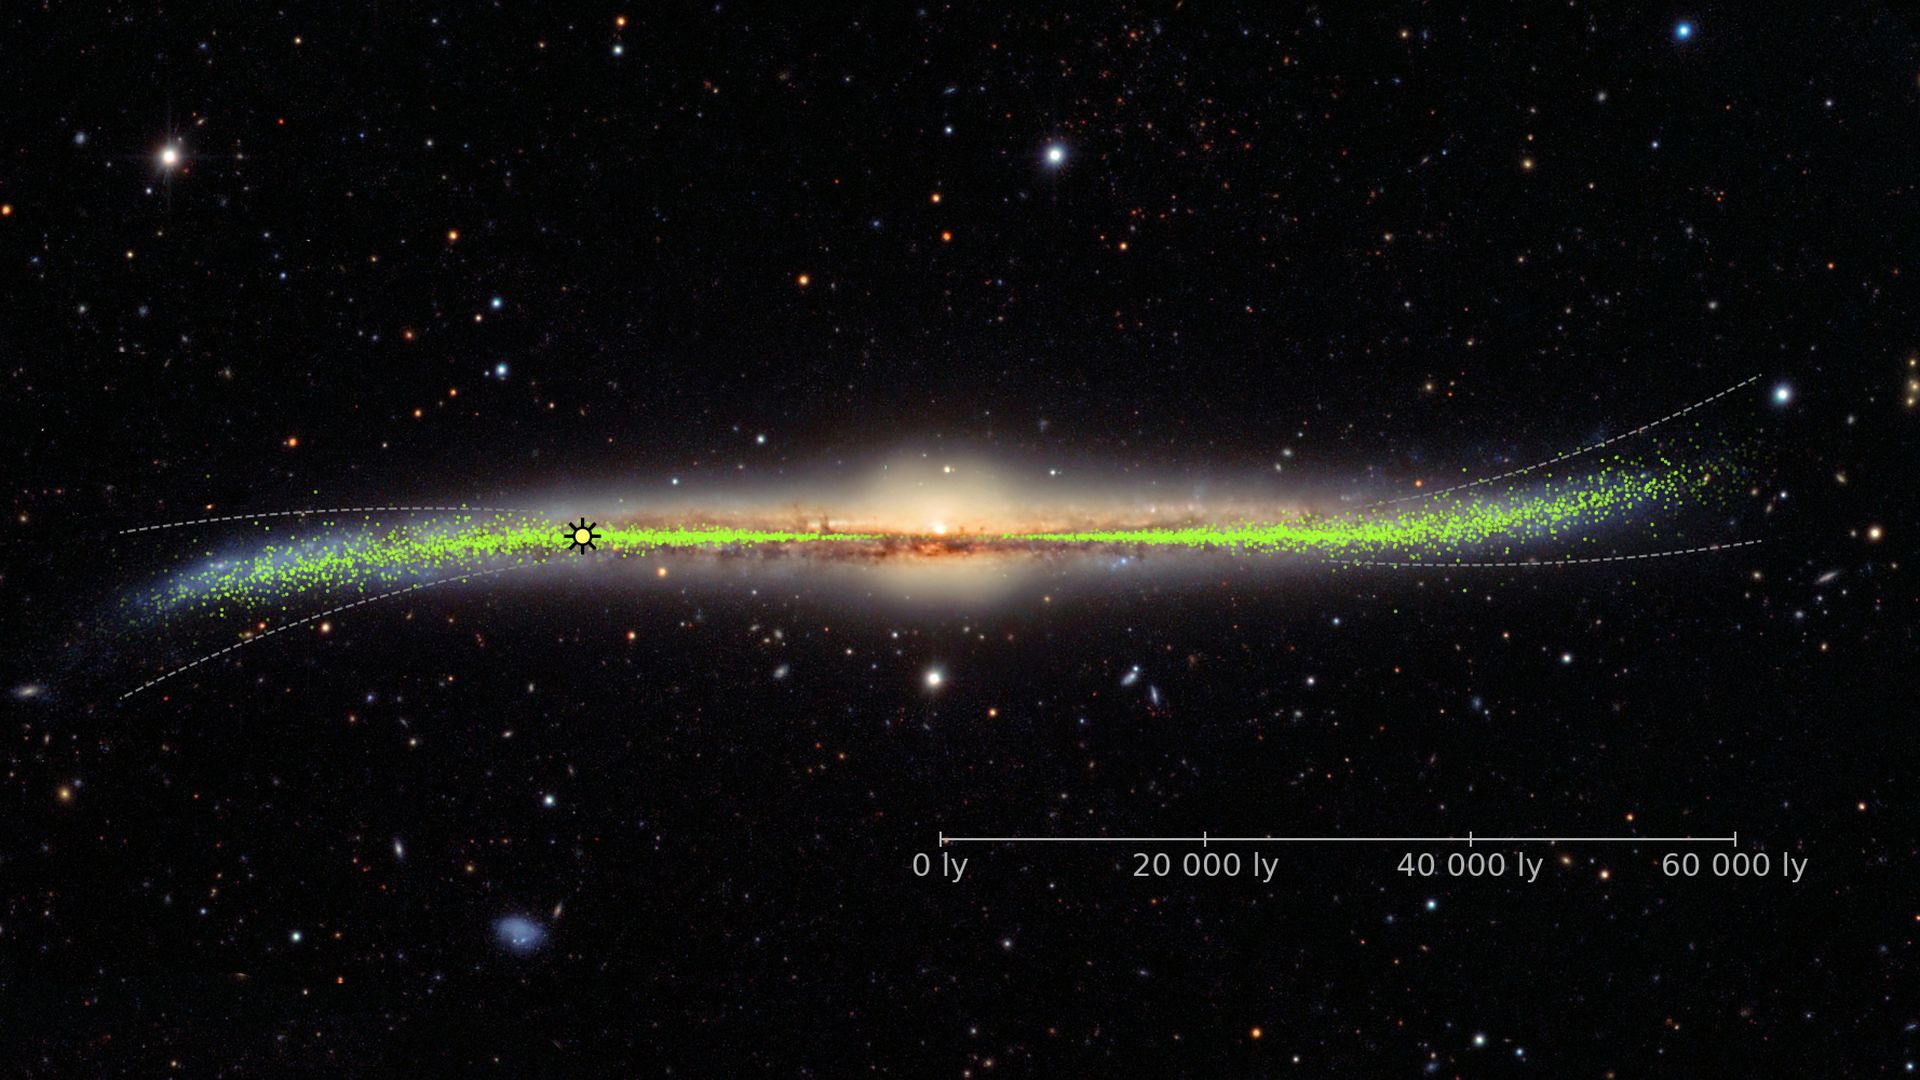 Warped galaxy with the distribution of young stars (Cepheids) in its disk as inferred from the Milky Way Cepheids.